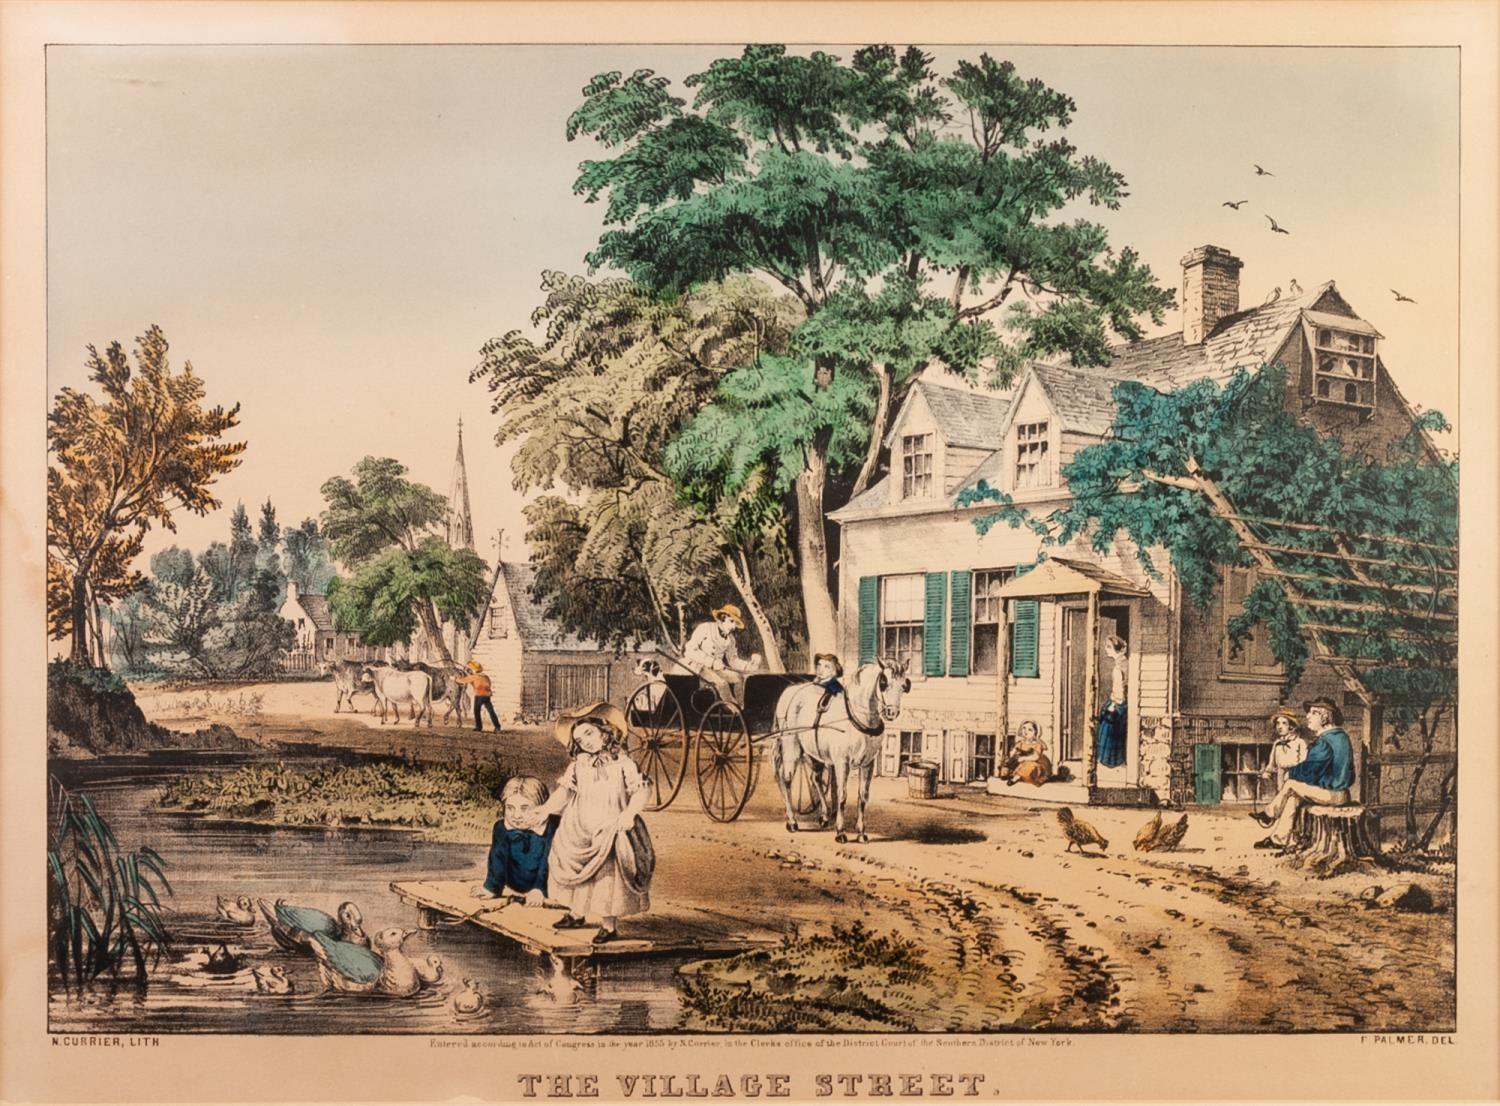 NATHANIEL T. CURRIER (1813-1888) AFTER F. PALMER HAND COLOURED LITHOGRAPH 'The Village Street'